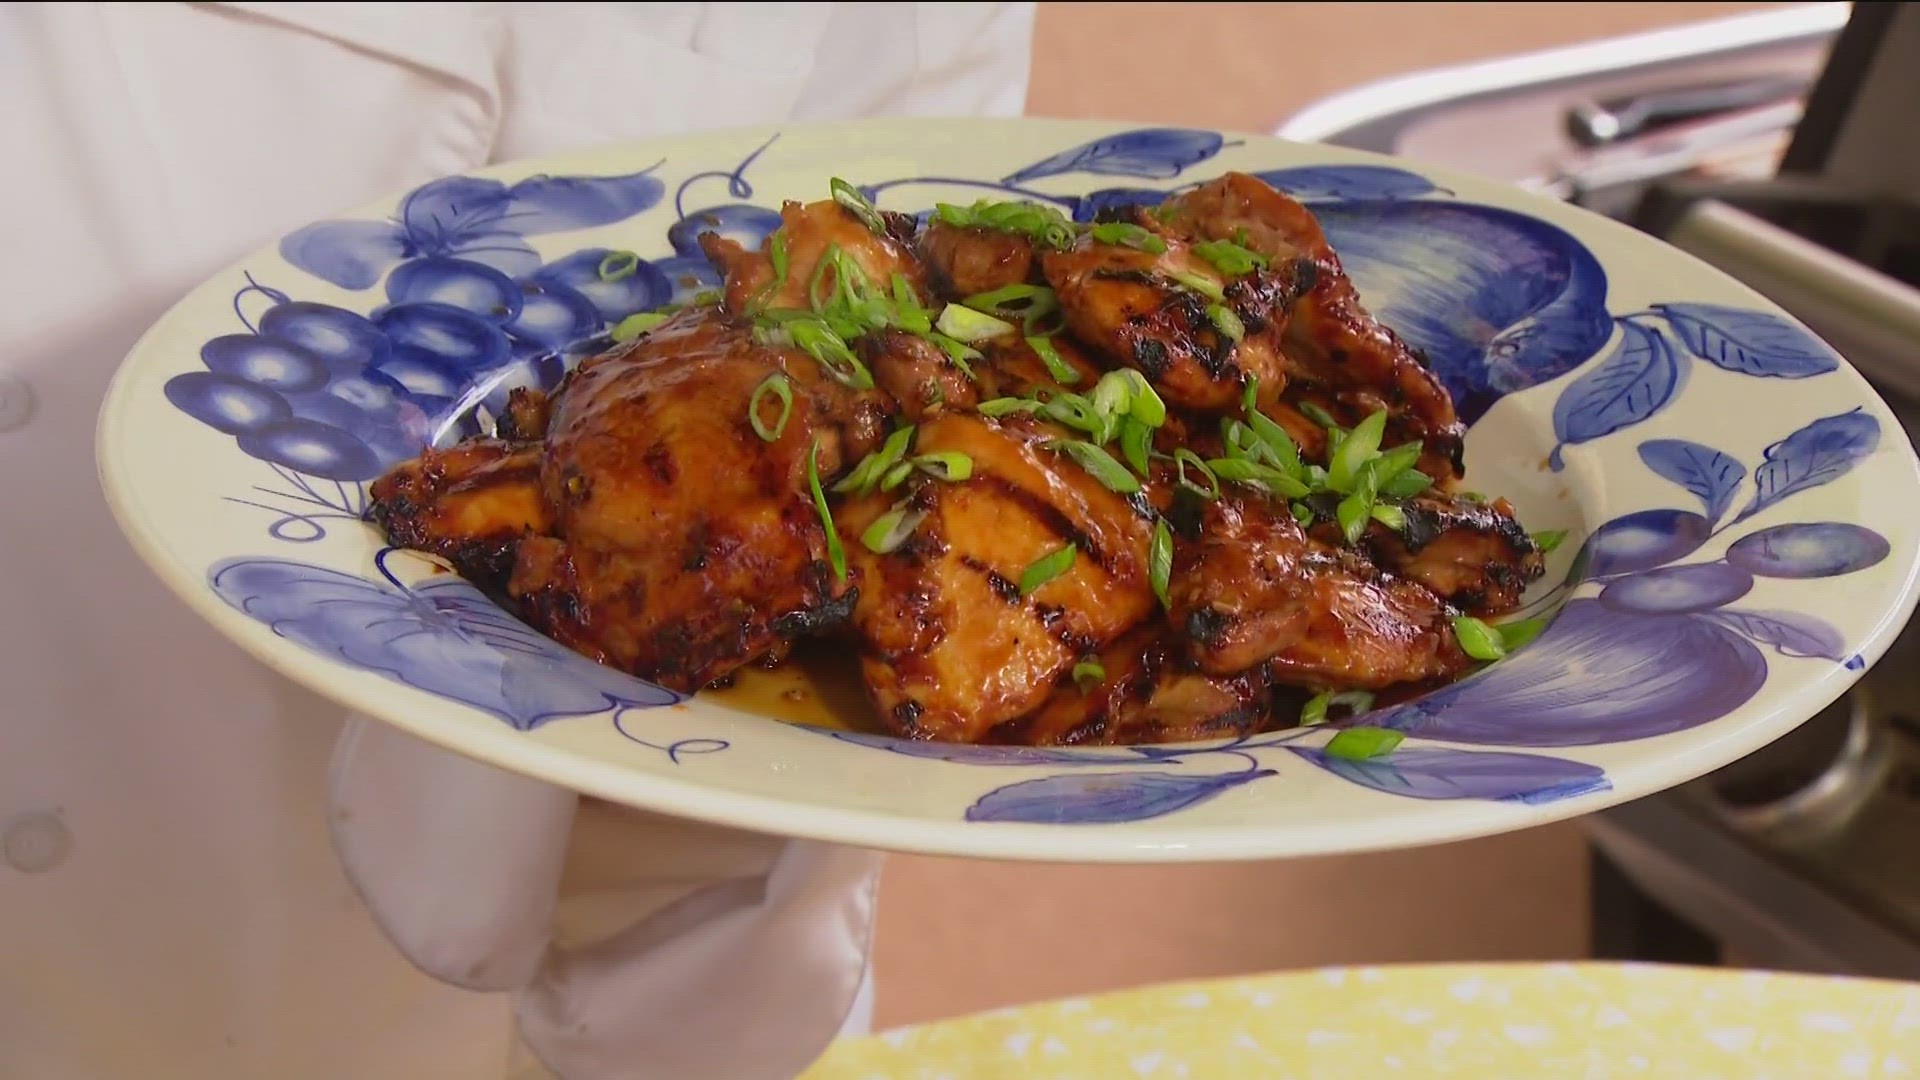 Huli Huli Chicken is Hawaiian BBQ sauce in my book and works great on everything.